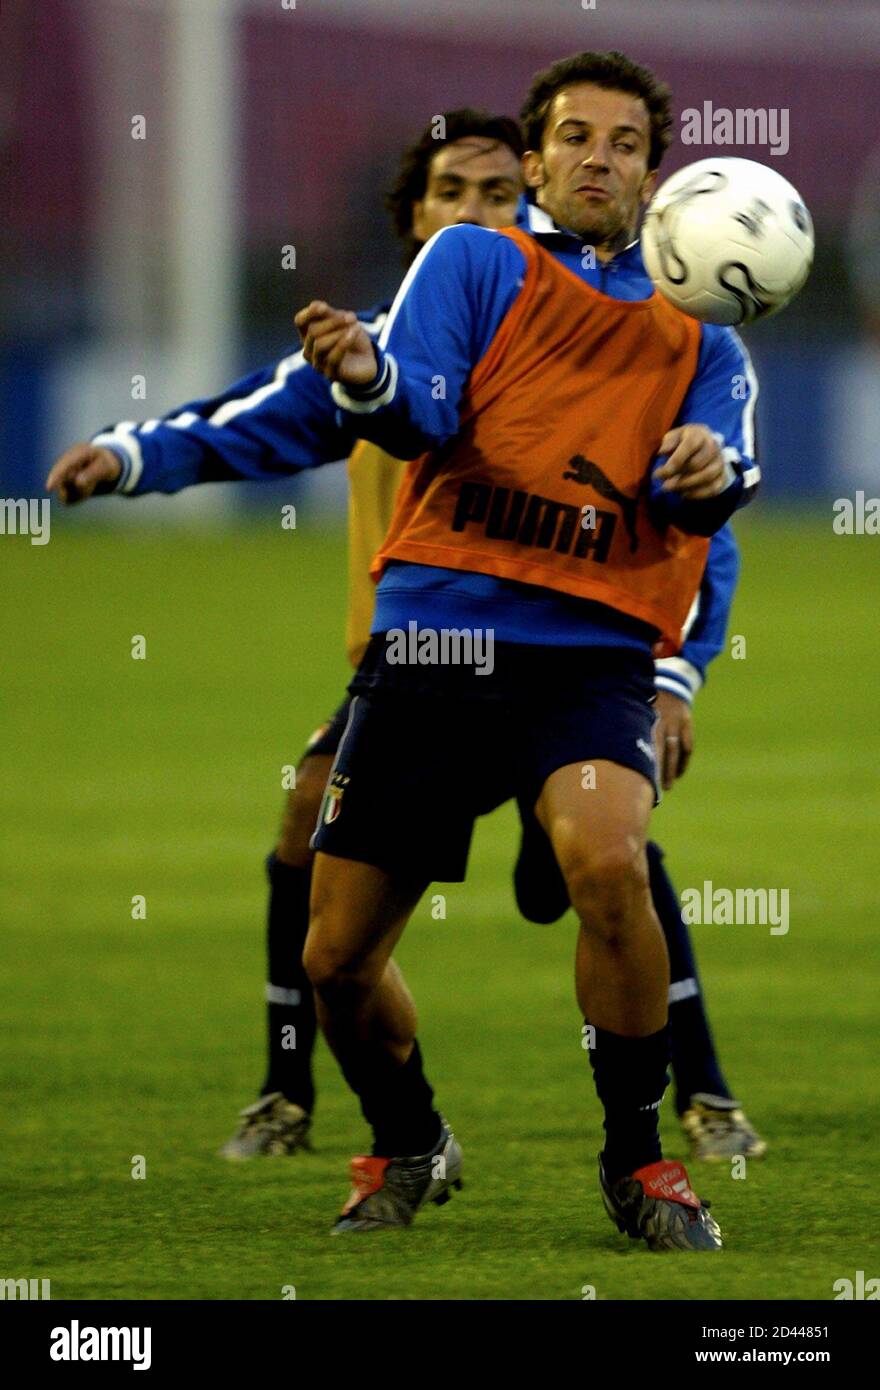 Italy S Alessandro Del Piero Front Controls The Ball During Team Practice In Belgrade September 9 03 Italy Will Play Serbia And Montenegro On Wednesday In A Euro 04 Qualification Match Reuters Giampiero Sposito